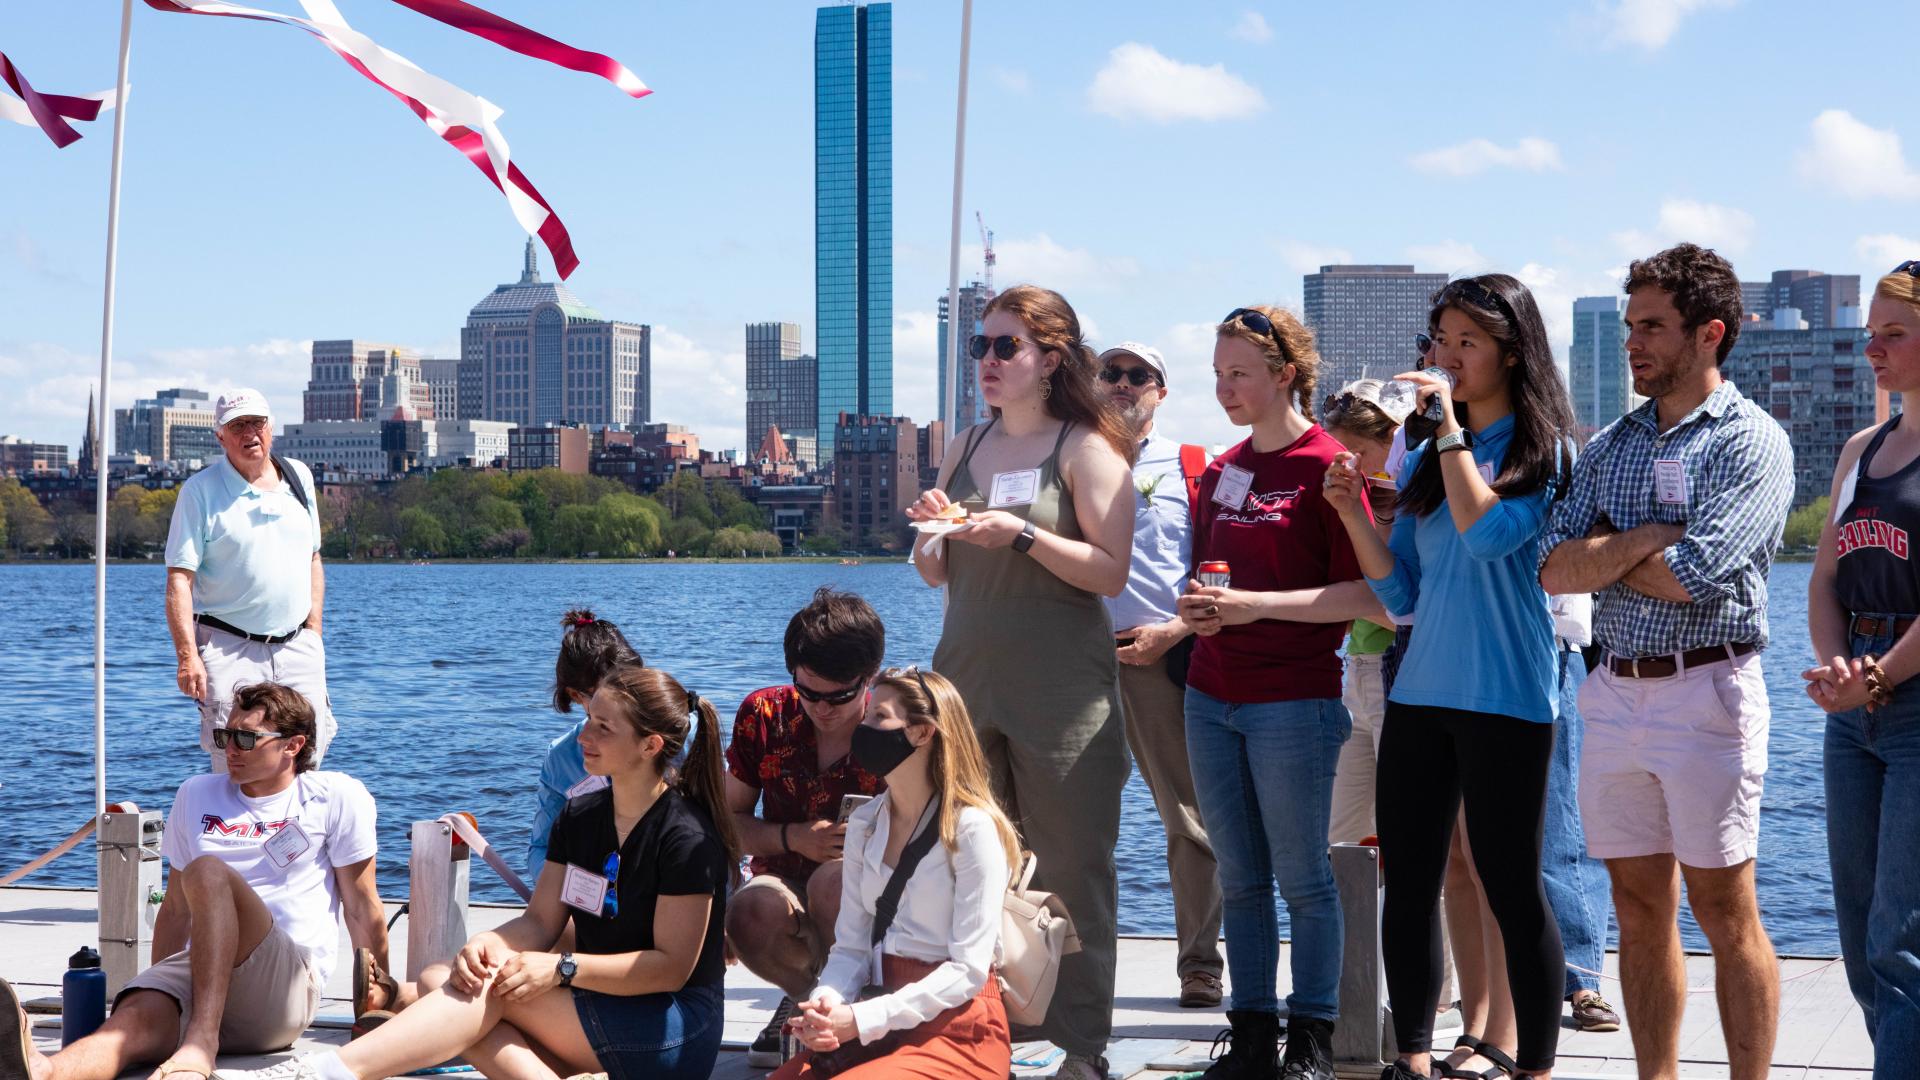 On May 11, a boat donated by MechE alumna and chair of the MIT Corporation Diane Greene SM ’78, was christened the “Chrys Chryssostomidis” in honor of Professor Chryssostomos Chryssostomidis. Greene and Chryssostomidis celebrated alongside members of the MIT community in a boat naming ceremony at the MIT Sailing Pavilion. 